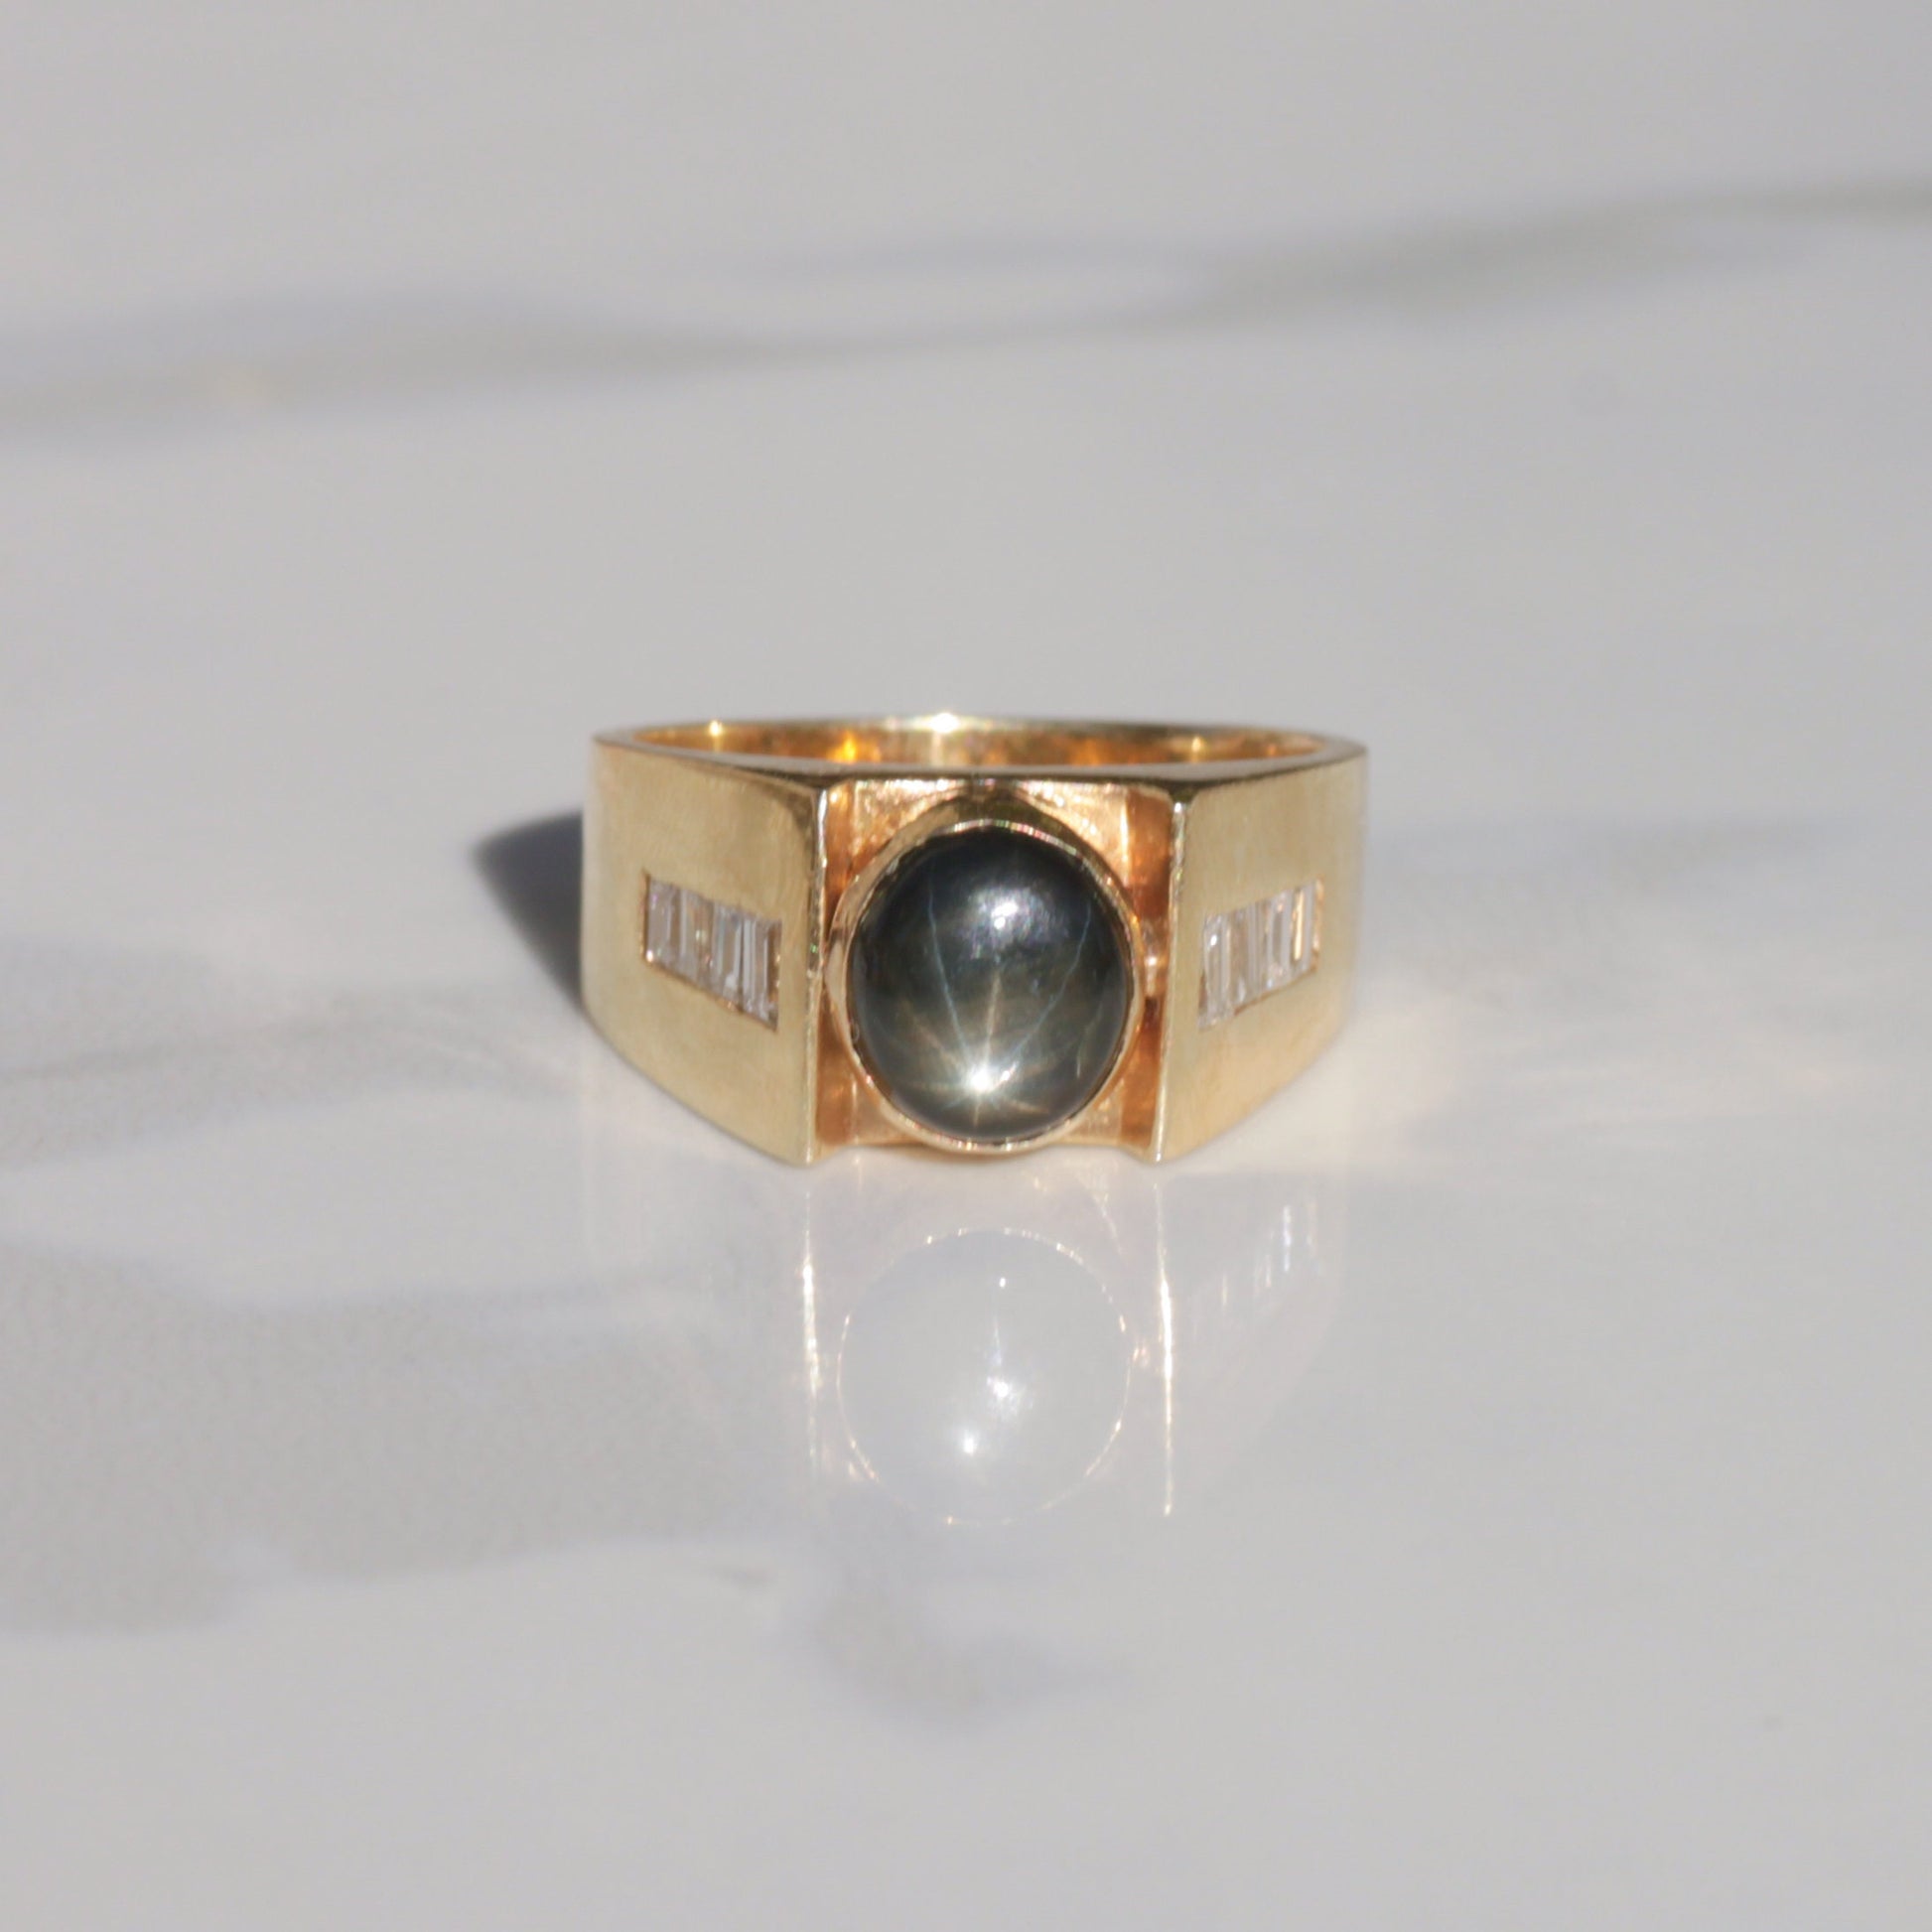 Vintage Black Double Star Sapphire and Diamond Ring 14k Gold Sz 6.75